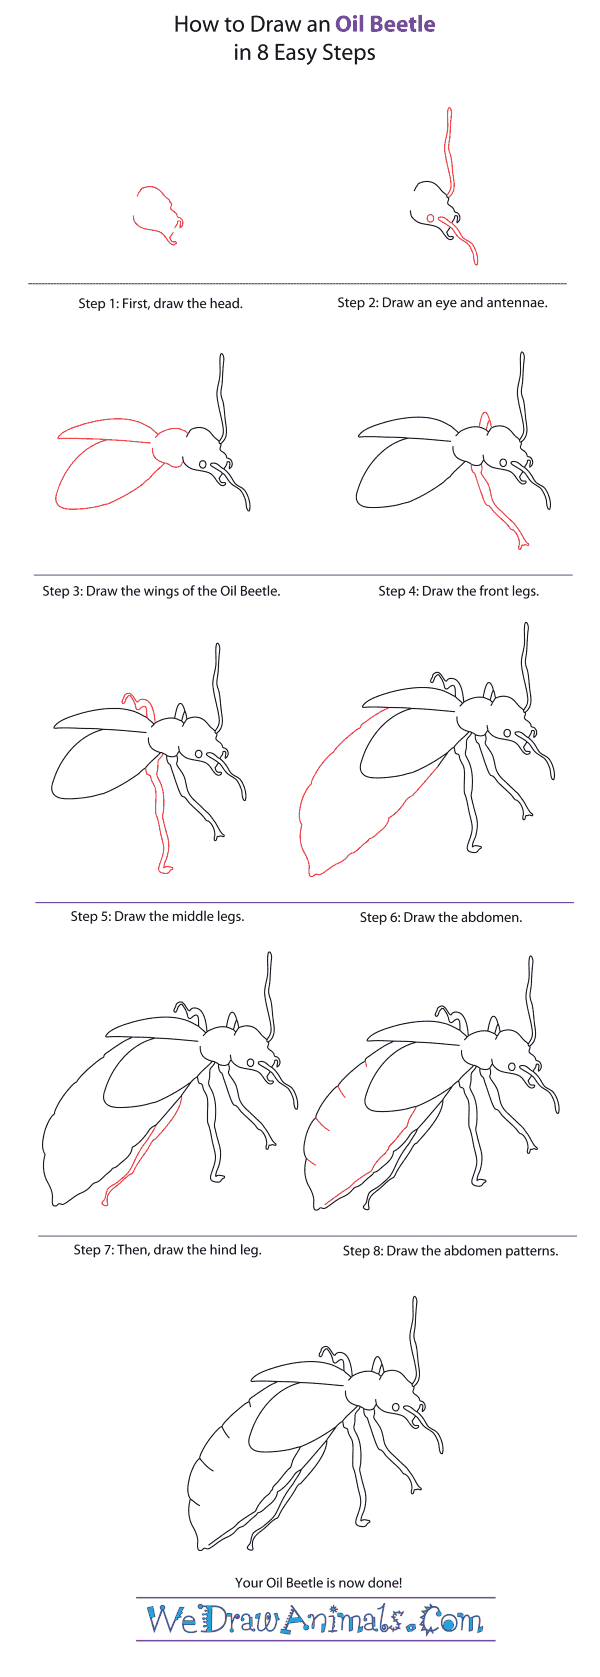 How to Draw an Oil Beetle - Step-By-Step Tutorial